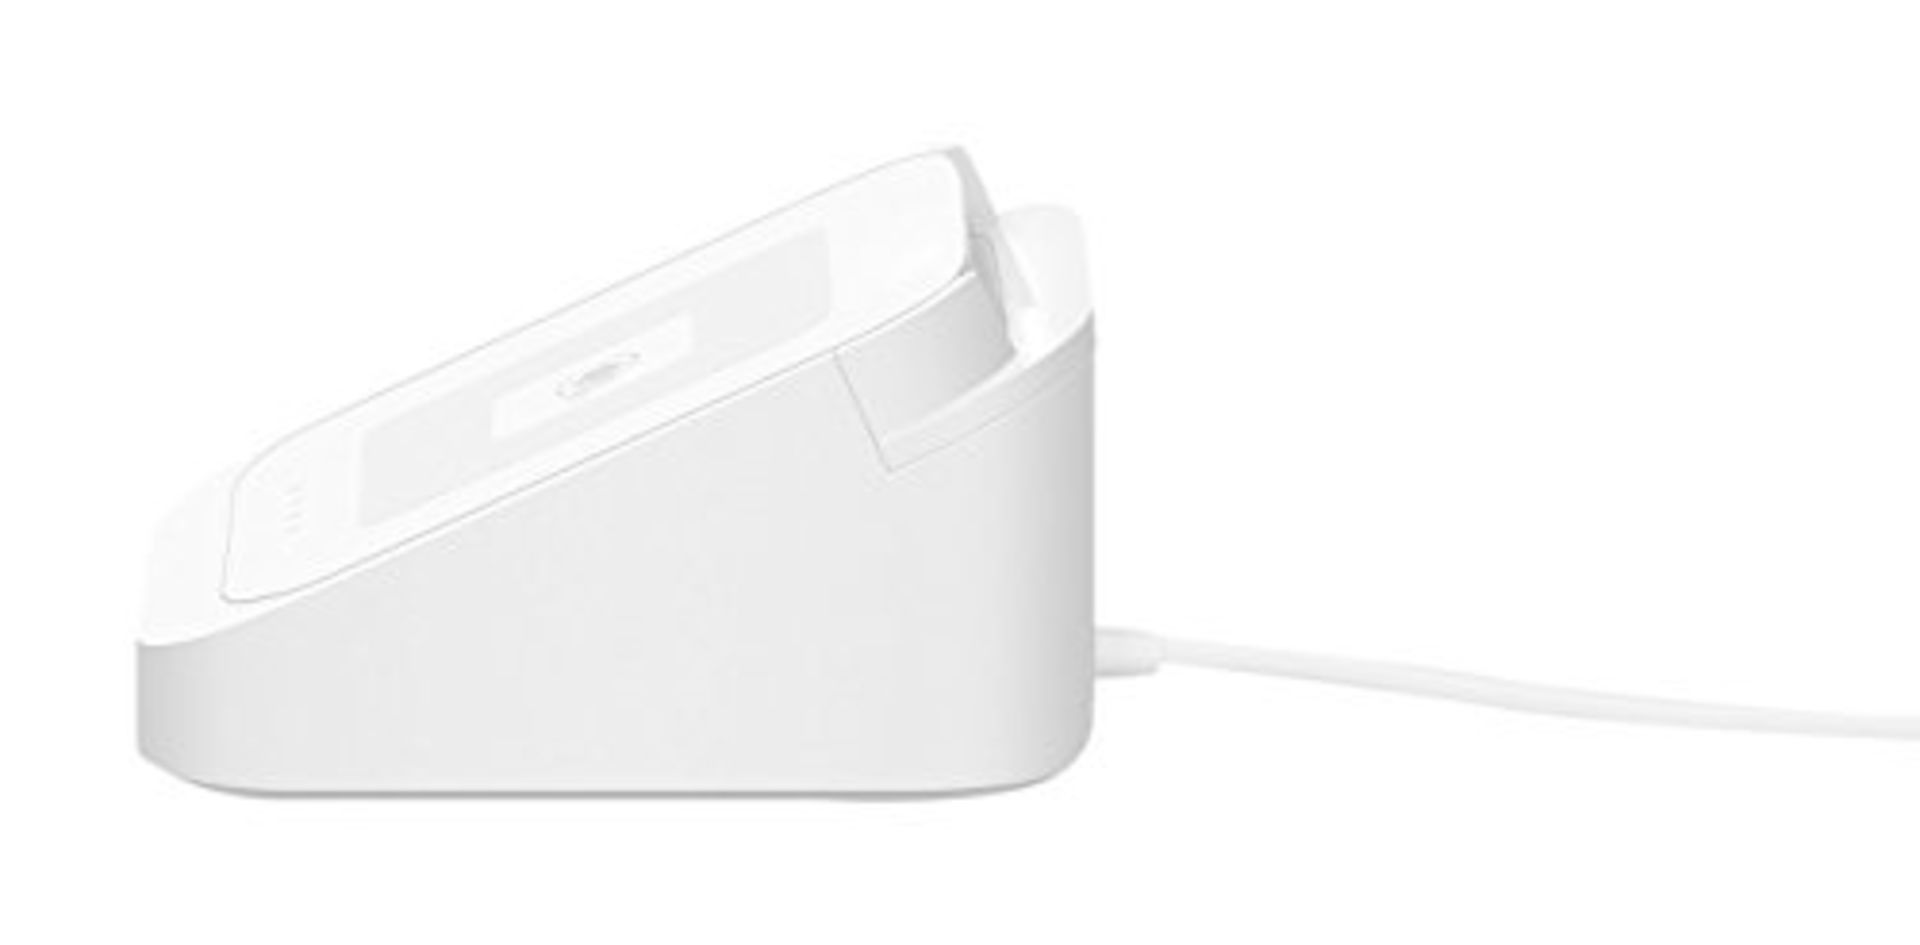 Square Dock - Keeps Square Reader Charged for Contactless, Chip & PIN payments